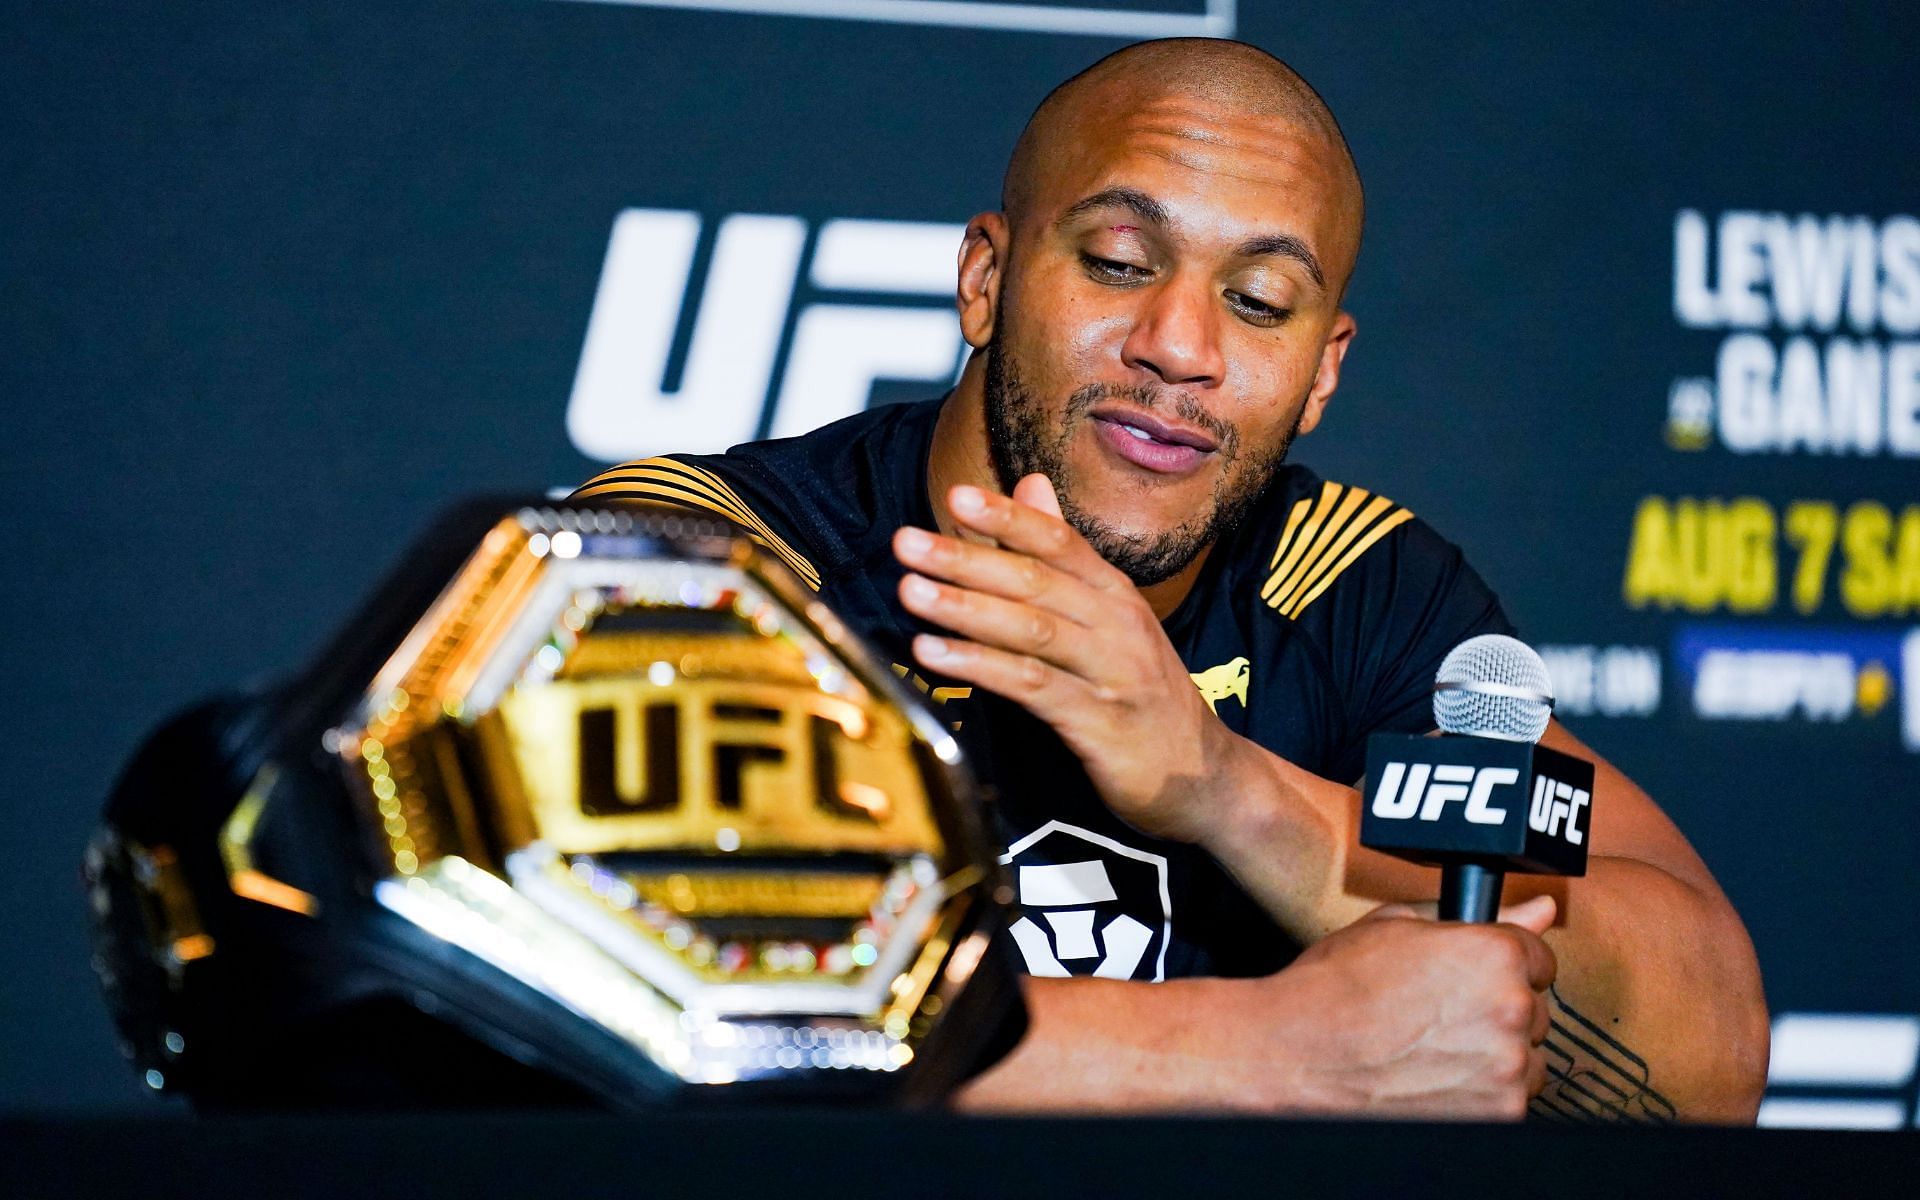 Ciryl Gane speaks to the media after winning his interim title fight against Derrick Lewis at UFC 265 in August 2021